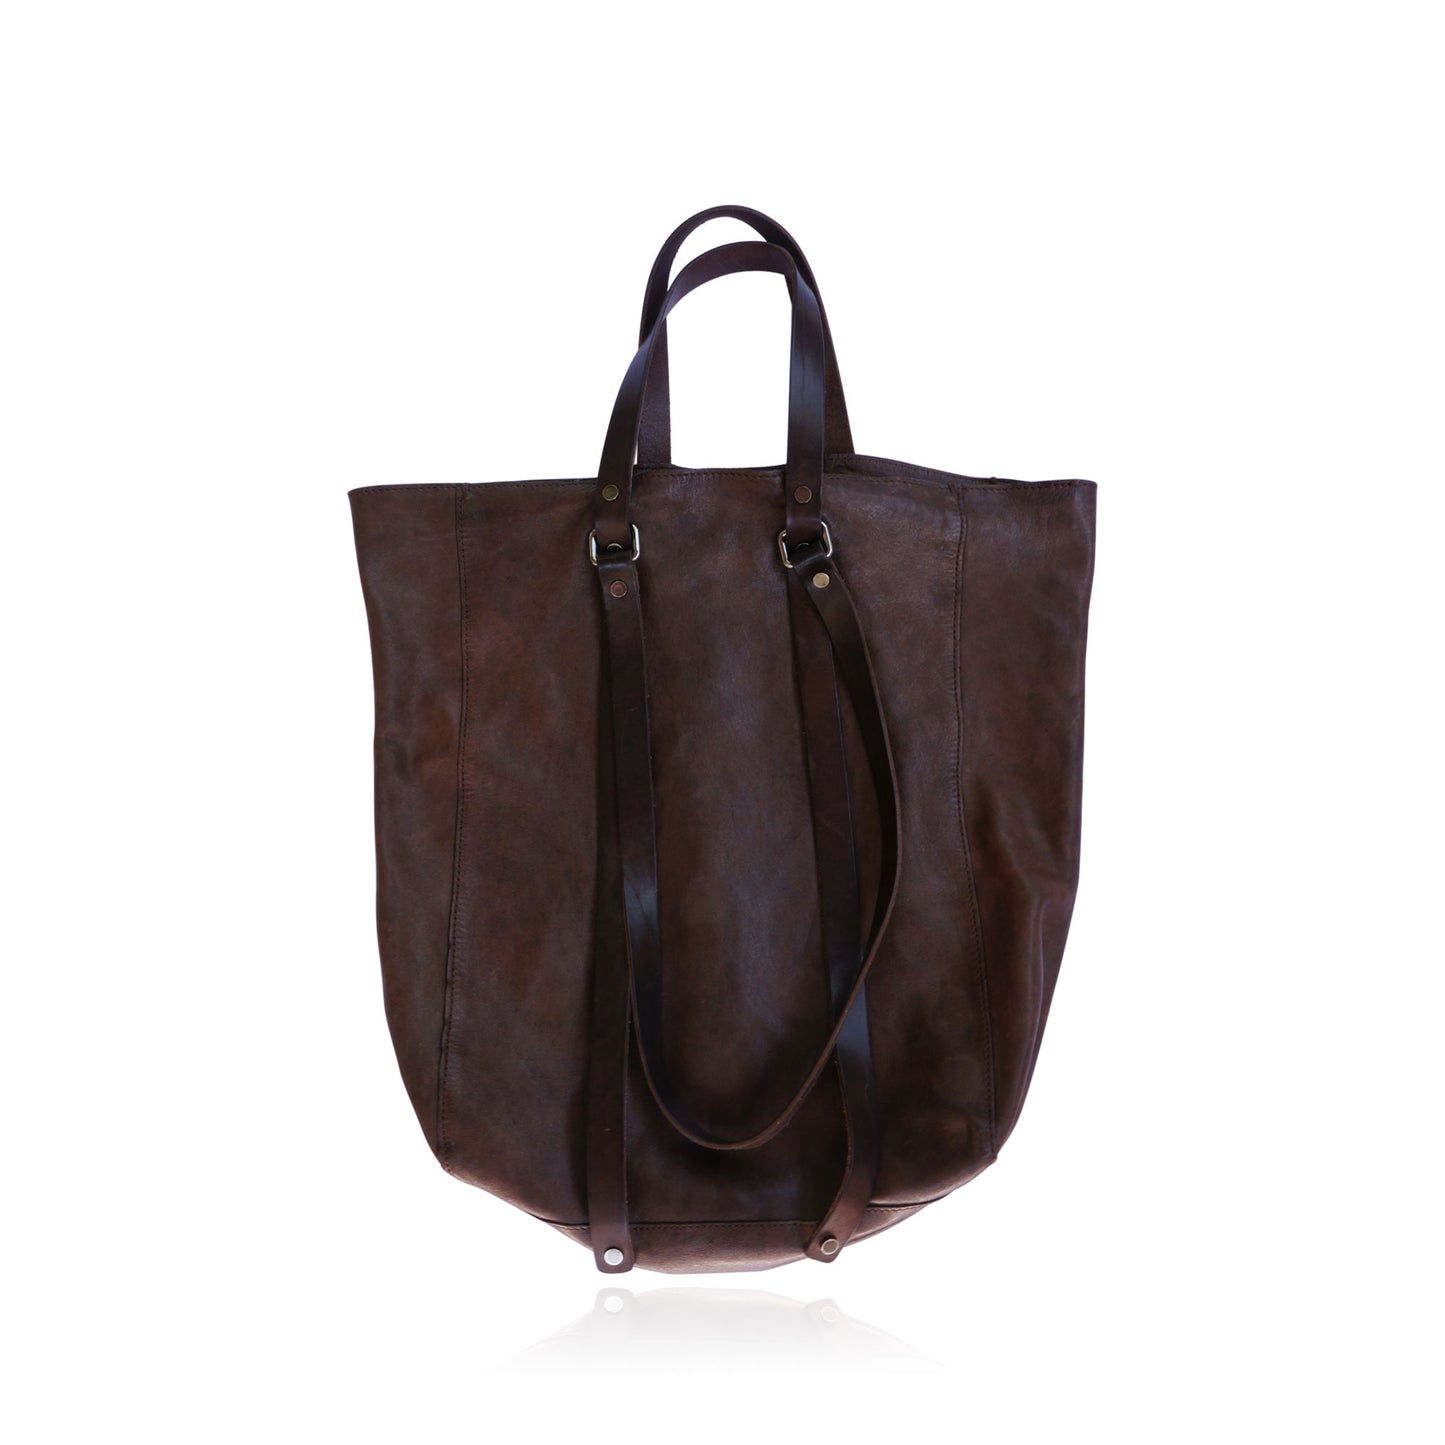 COSTUME NATIONAL REVERSIBLE DOUBLE TOTE BROWN LEATHER BAG - leefluxury.com